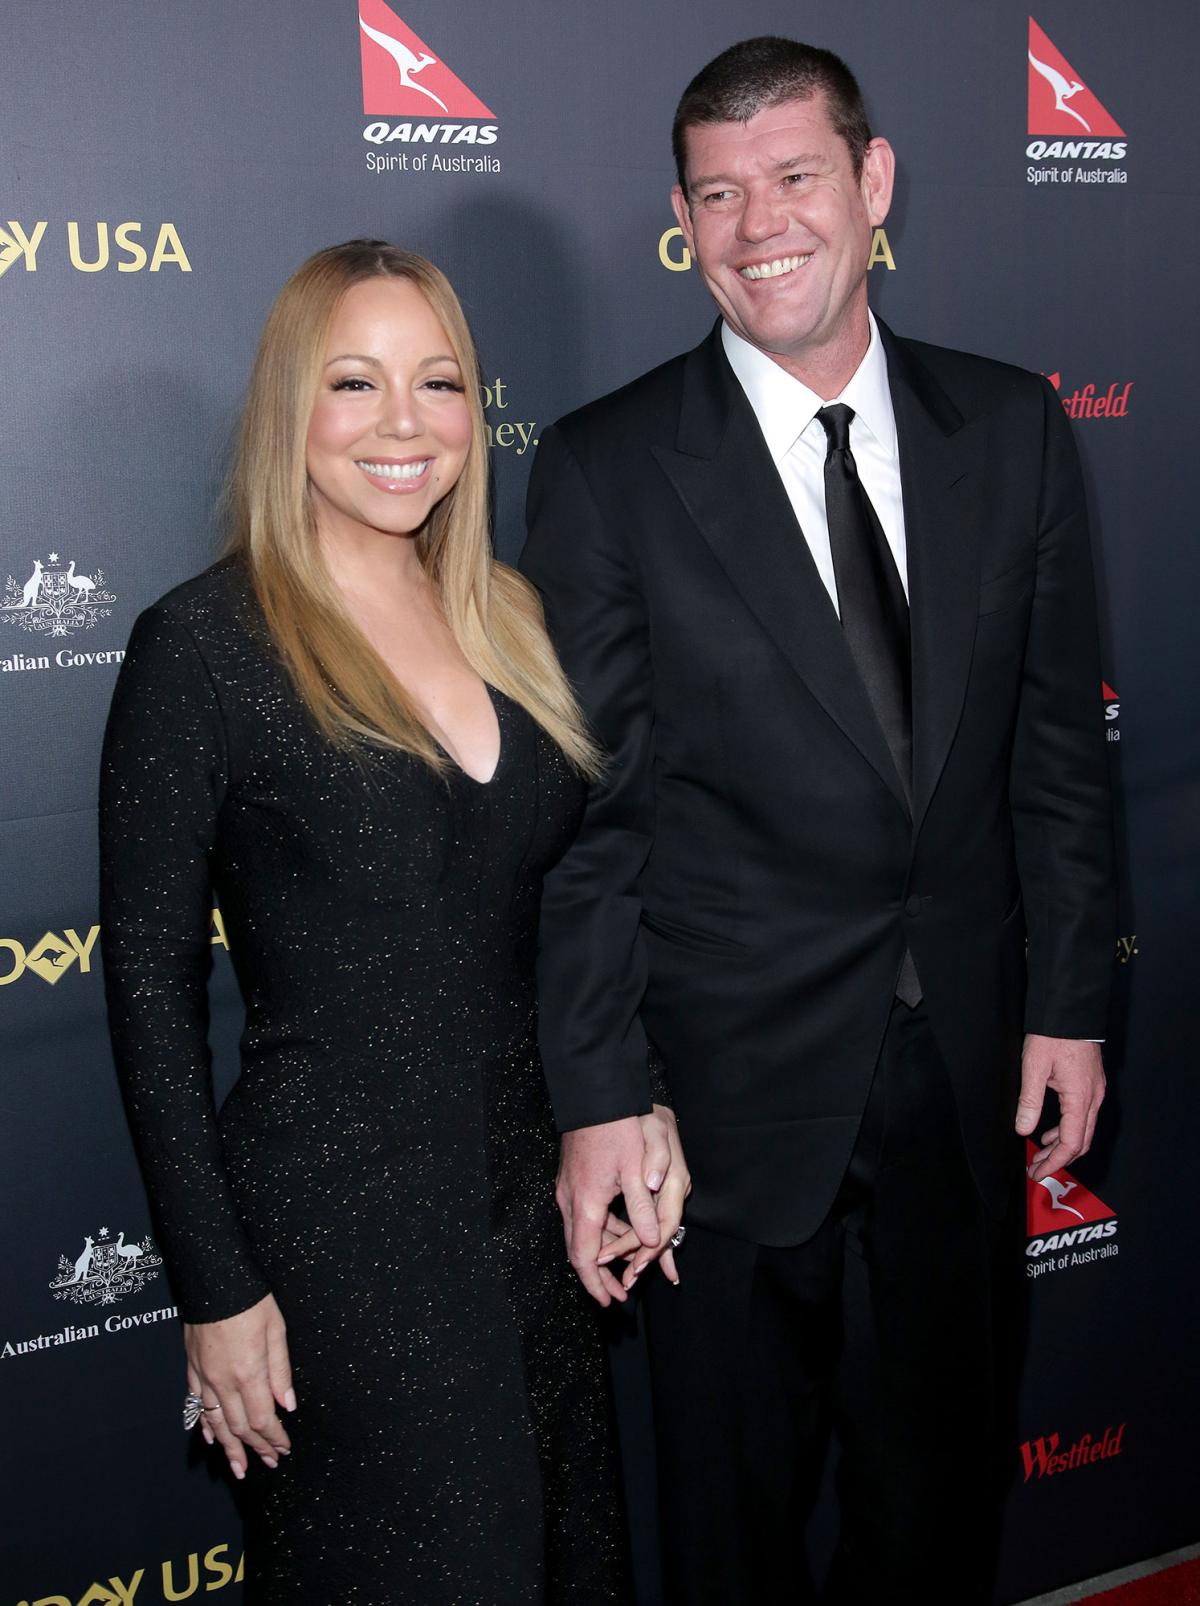 Mariah Carey Is Engaged to James Packer! A Look Back at Mimi's Past Loves